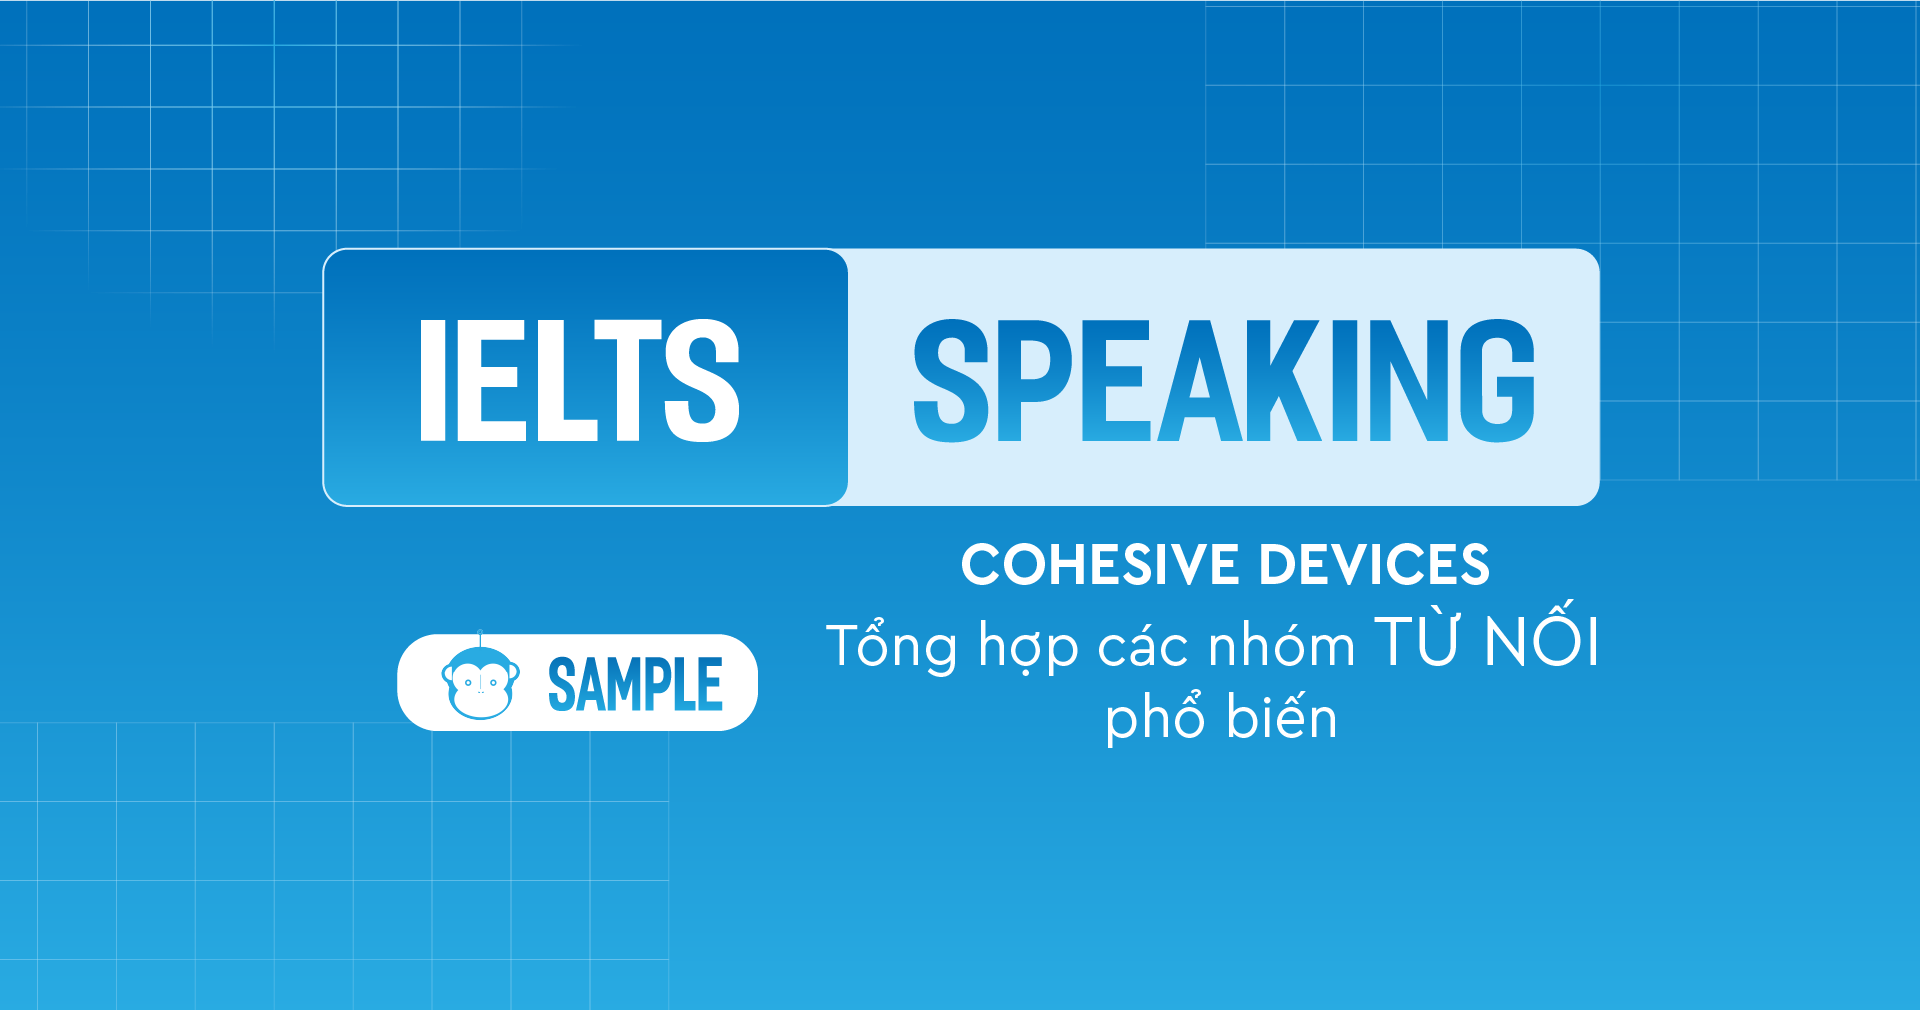 Cohesive Devices phổ biến trong IELTS Speaking